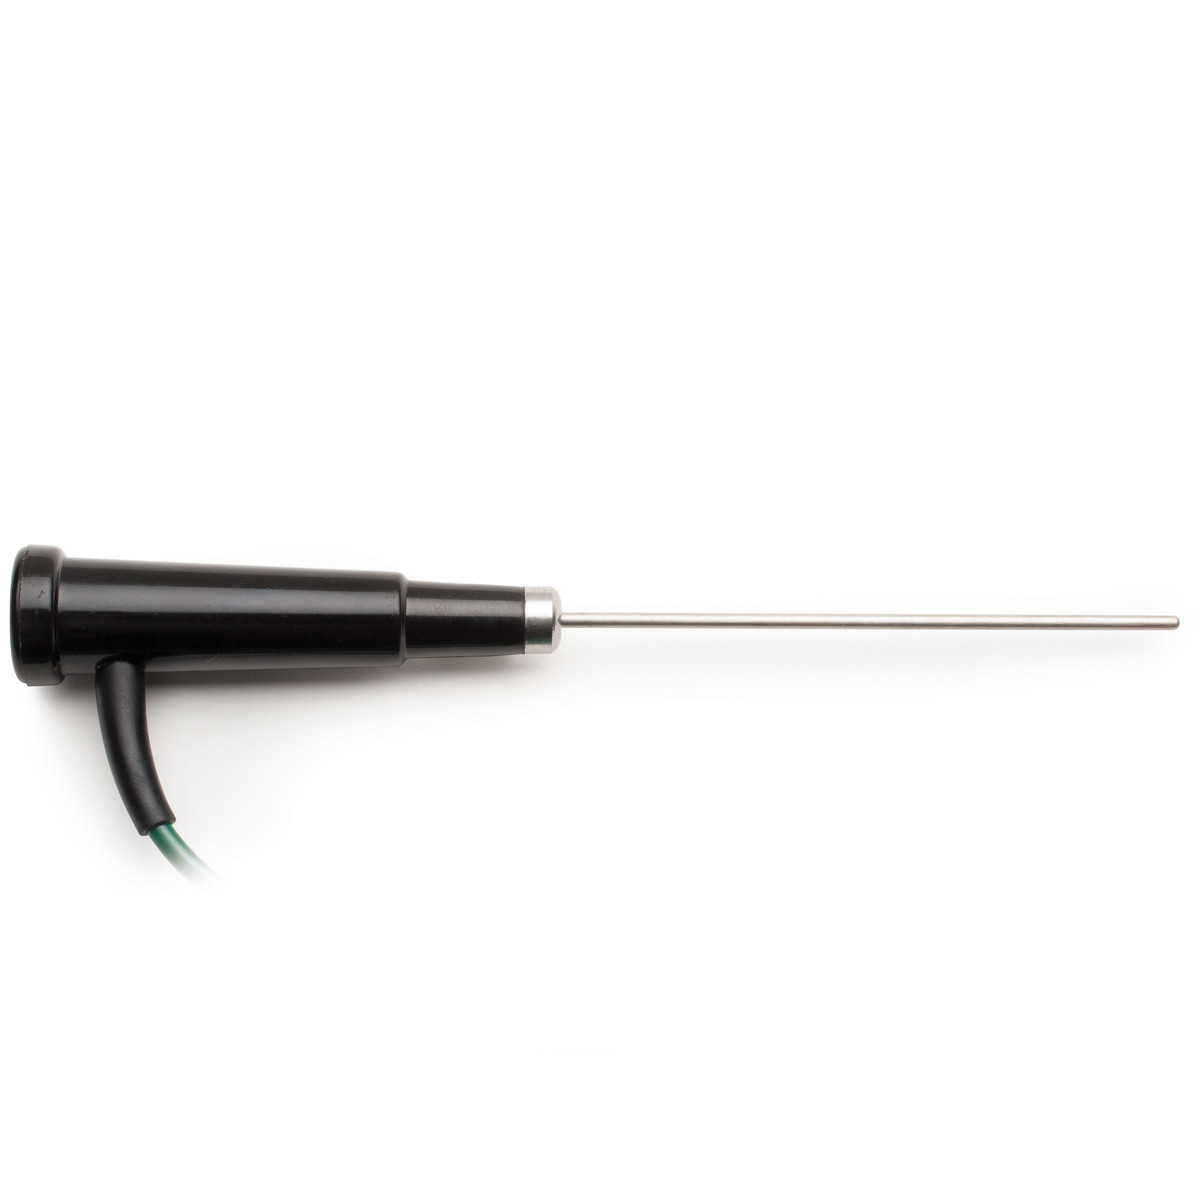 General Purpose K-Type Thermocouple Probe with Handle